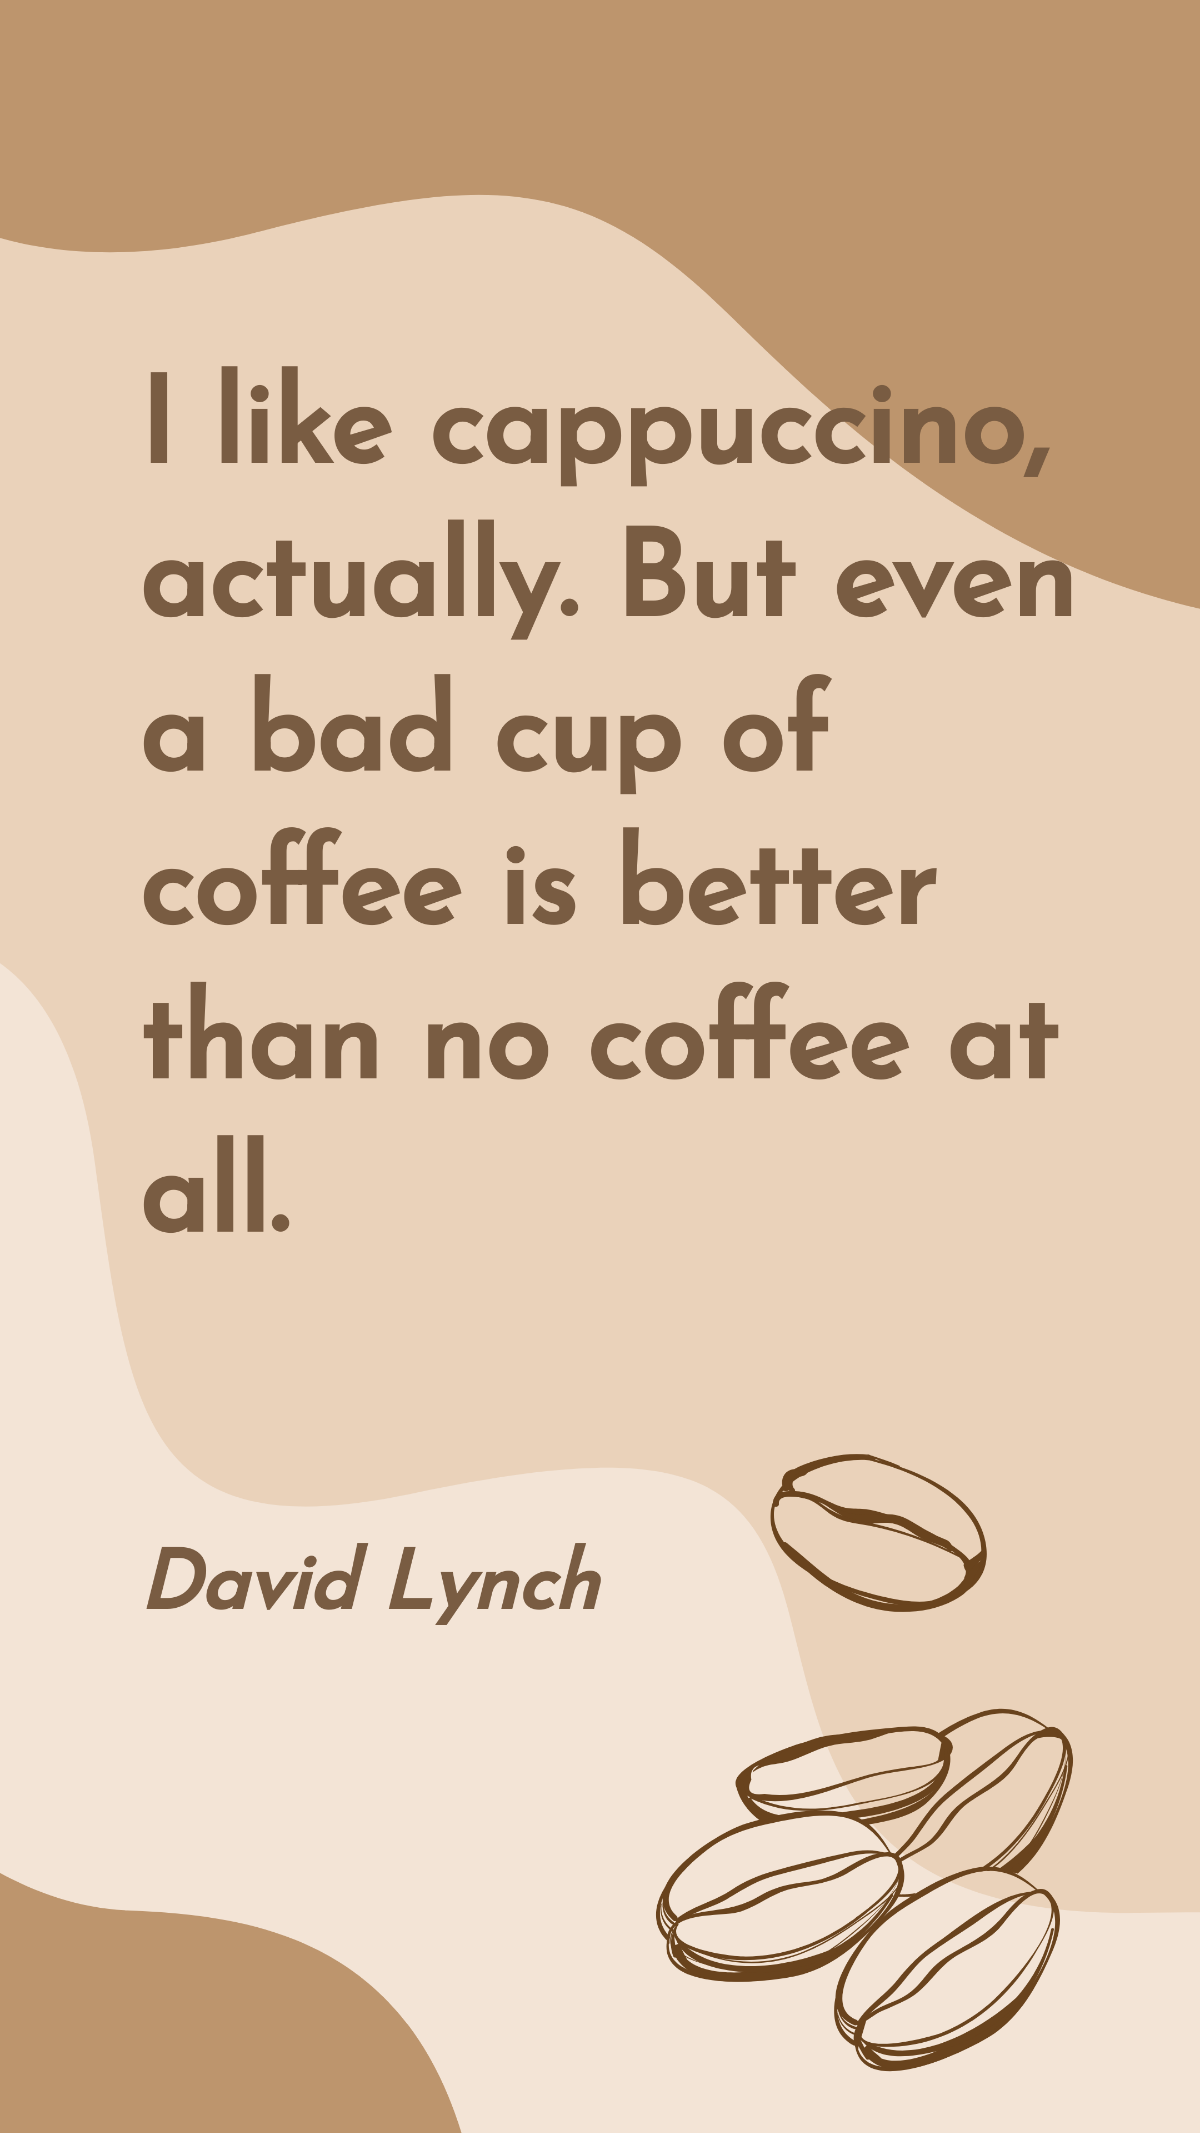 David Lynch - I like cappuccino, actually. But even a bad cup of coffee is better than no coffee at all.